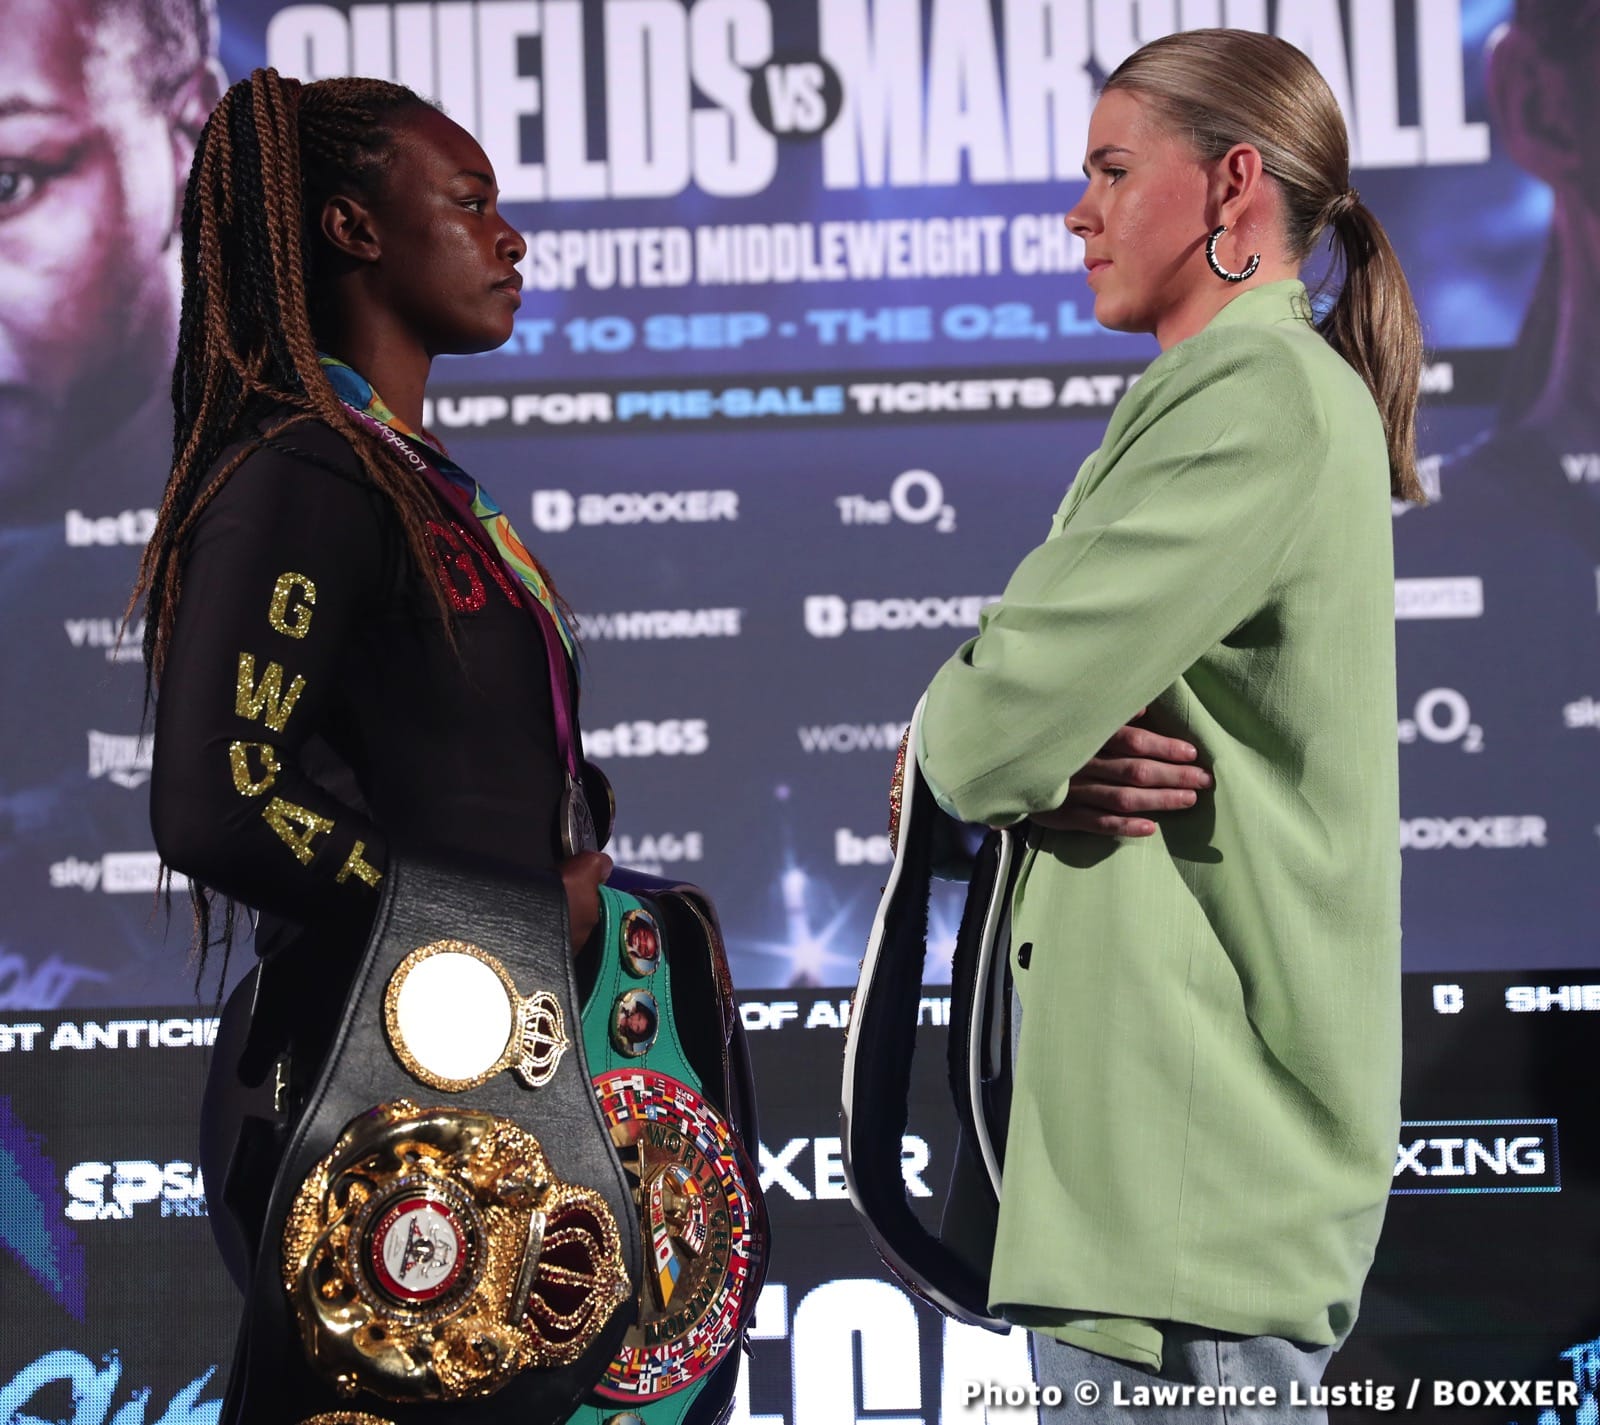 Claressa Shields Vs. Savannah Marshall This Saturday: Bad Blood, Along With Repeat Or Revenge!